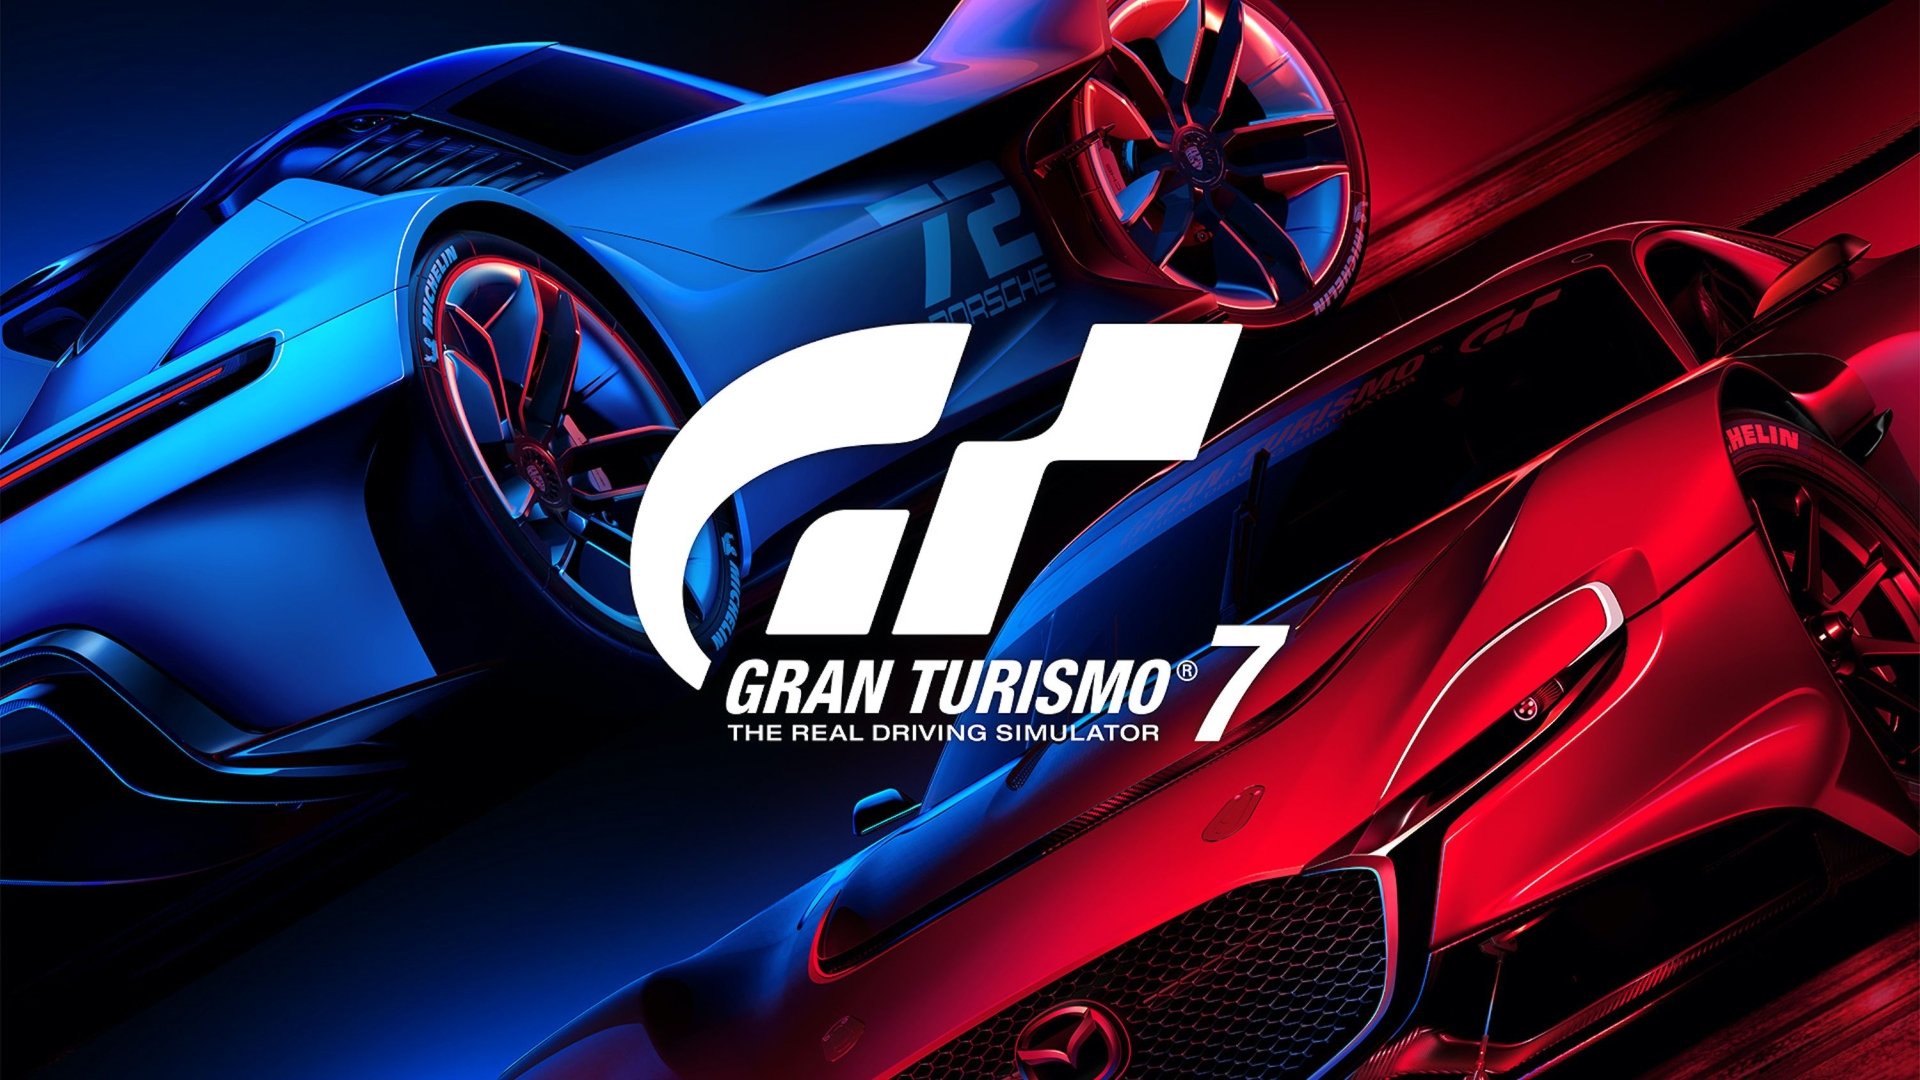 Gran Turismo 7 Gets Extensive State of Play Video Showing that GT Is Back in All its Glory